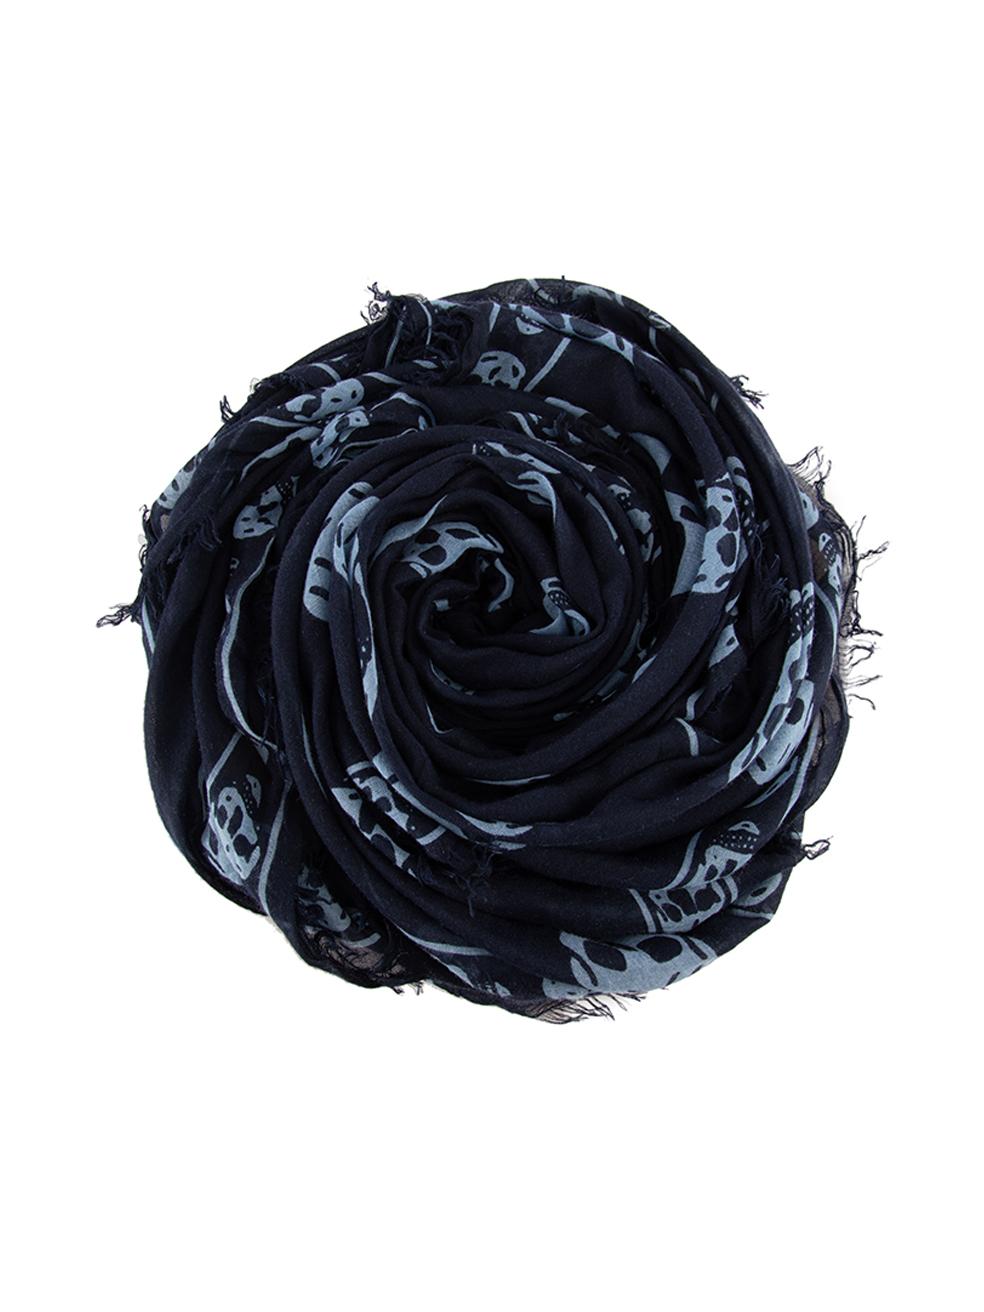 CONDITION is Very good. Minimal wear to scarf is evident. Minimal wear to the cotton with pulls to the weave on this used Alexander McQueen designer resale item.

Details
Navy
Cotton
Scarf
Skull pattern
Rectangle
Fringe hem
 
Composition
NO